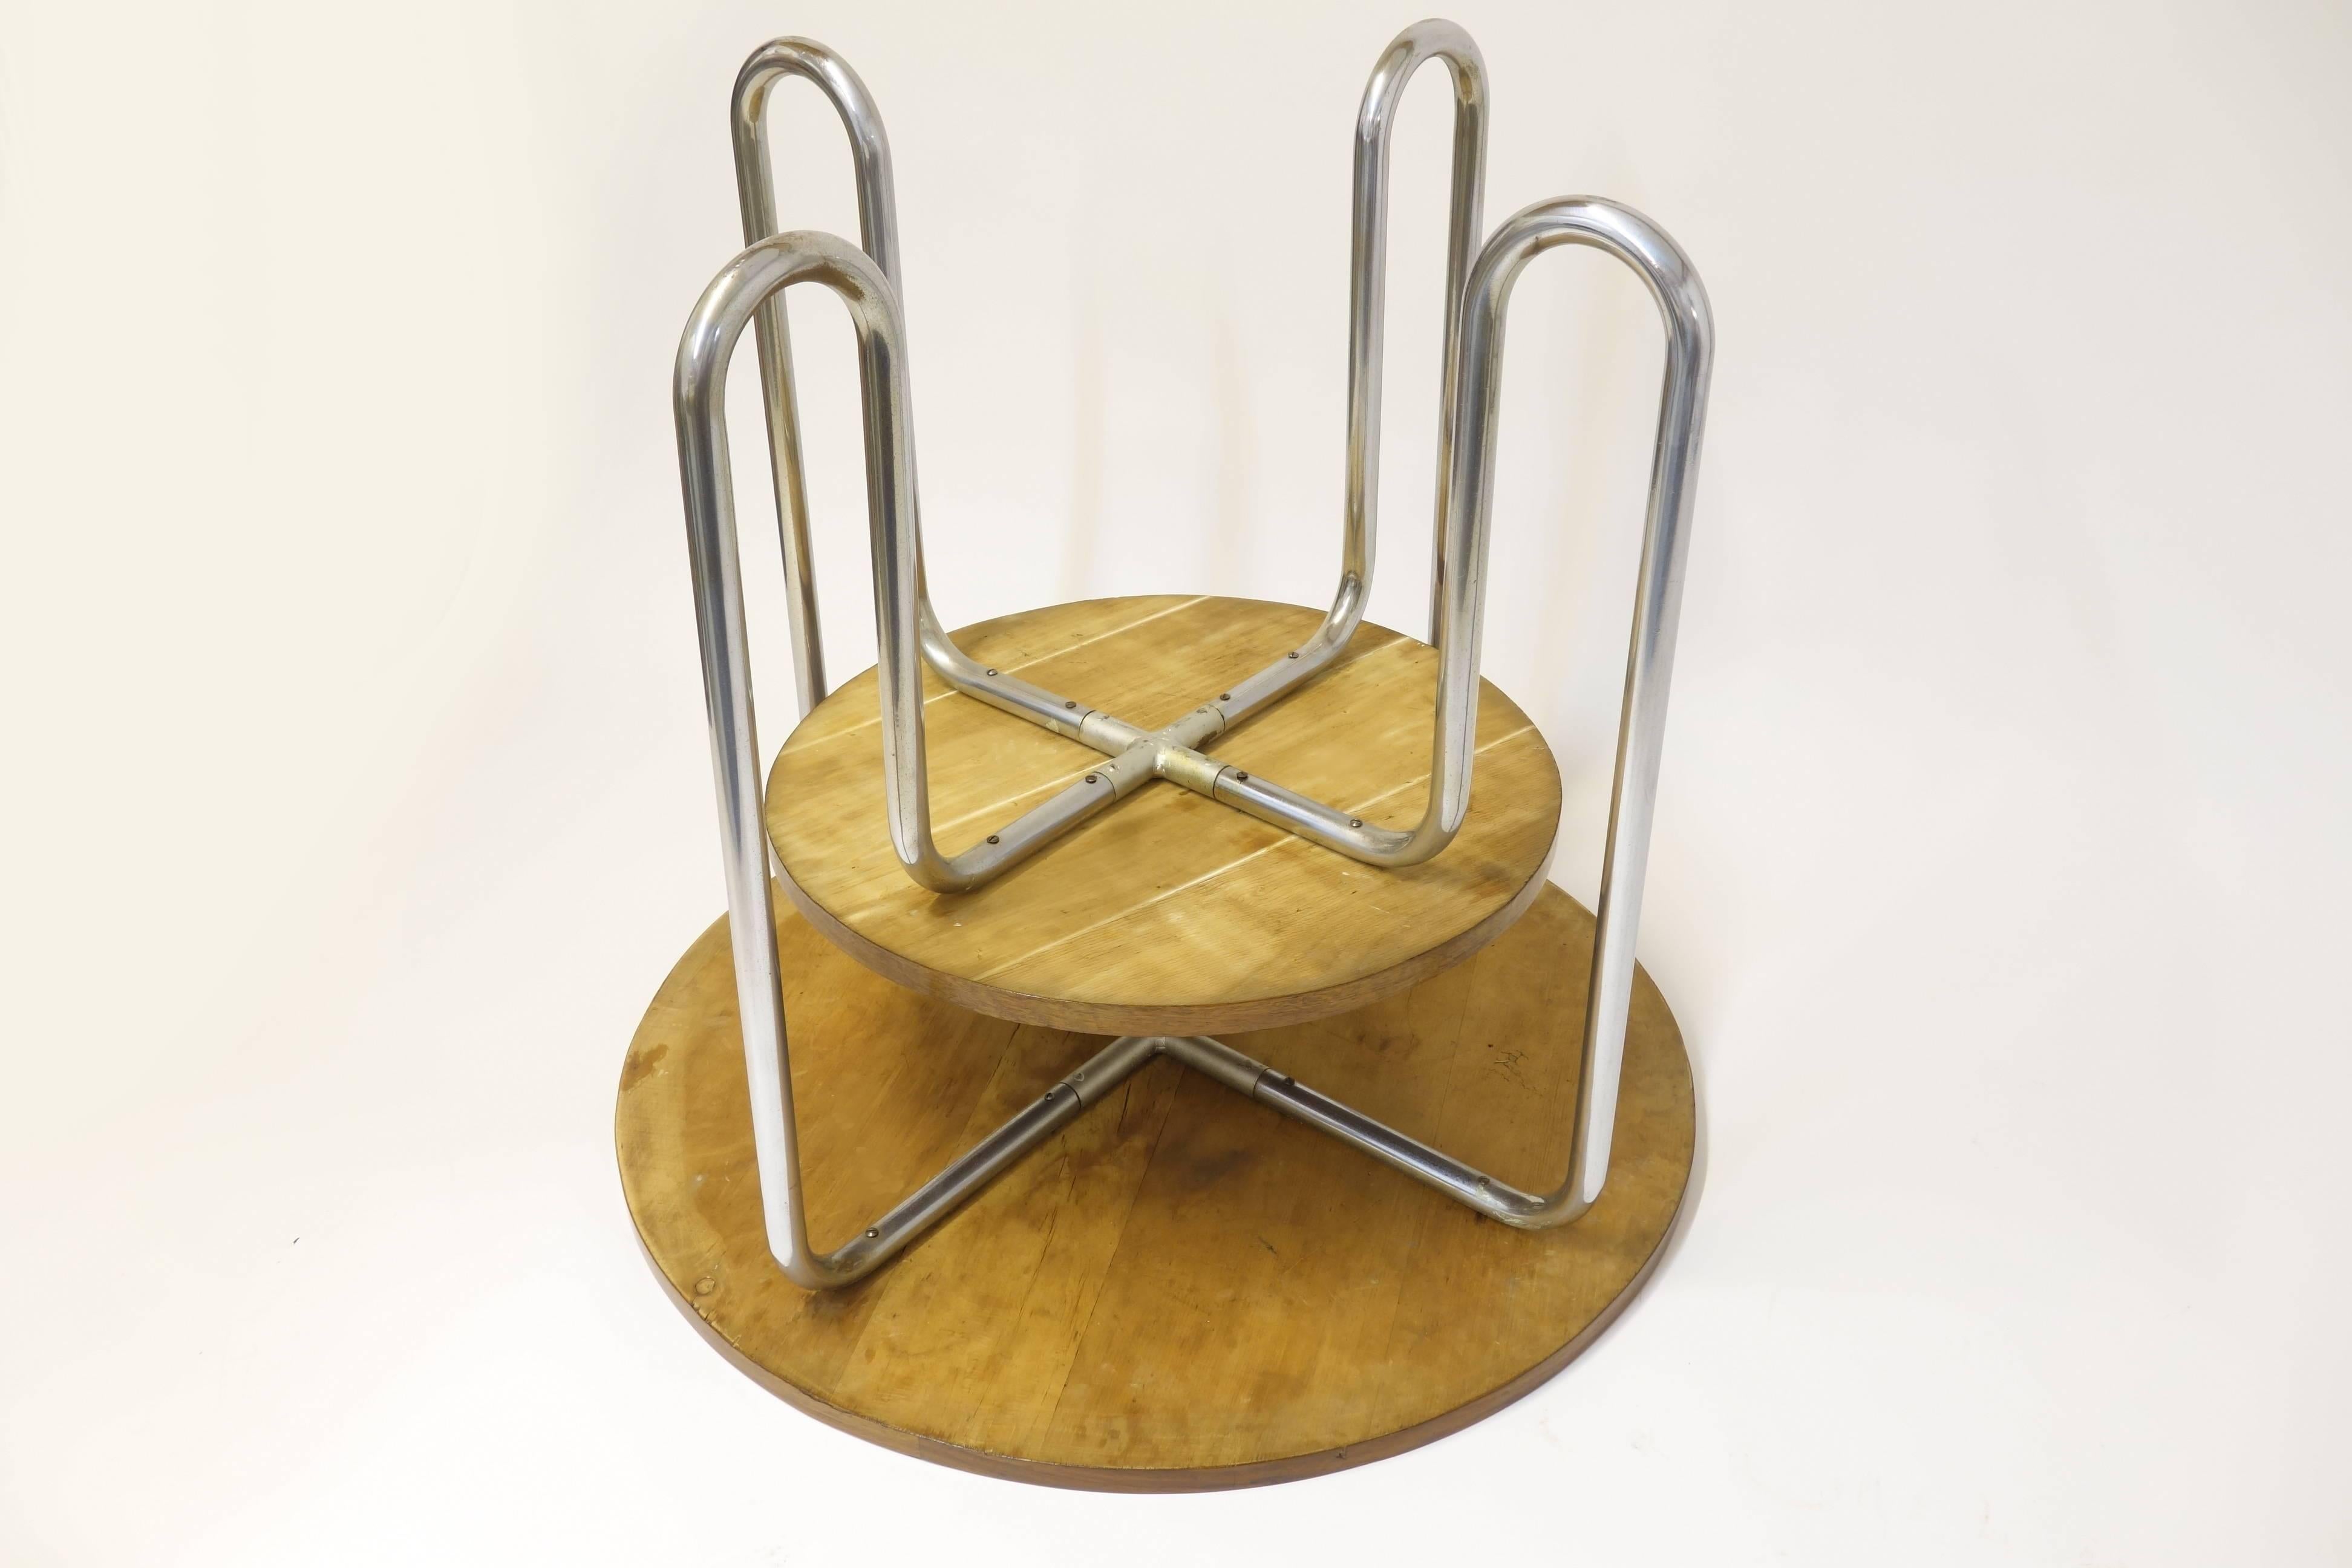 Midcentury Steel Tube Side Table, Bauhaus, Tubular In Excellent Condition For Sale In Perchtoldsdorf, AT